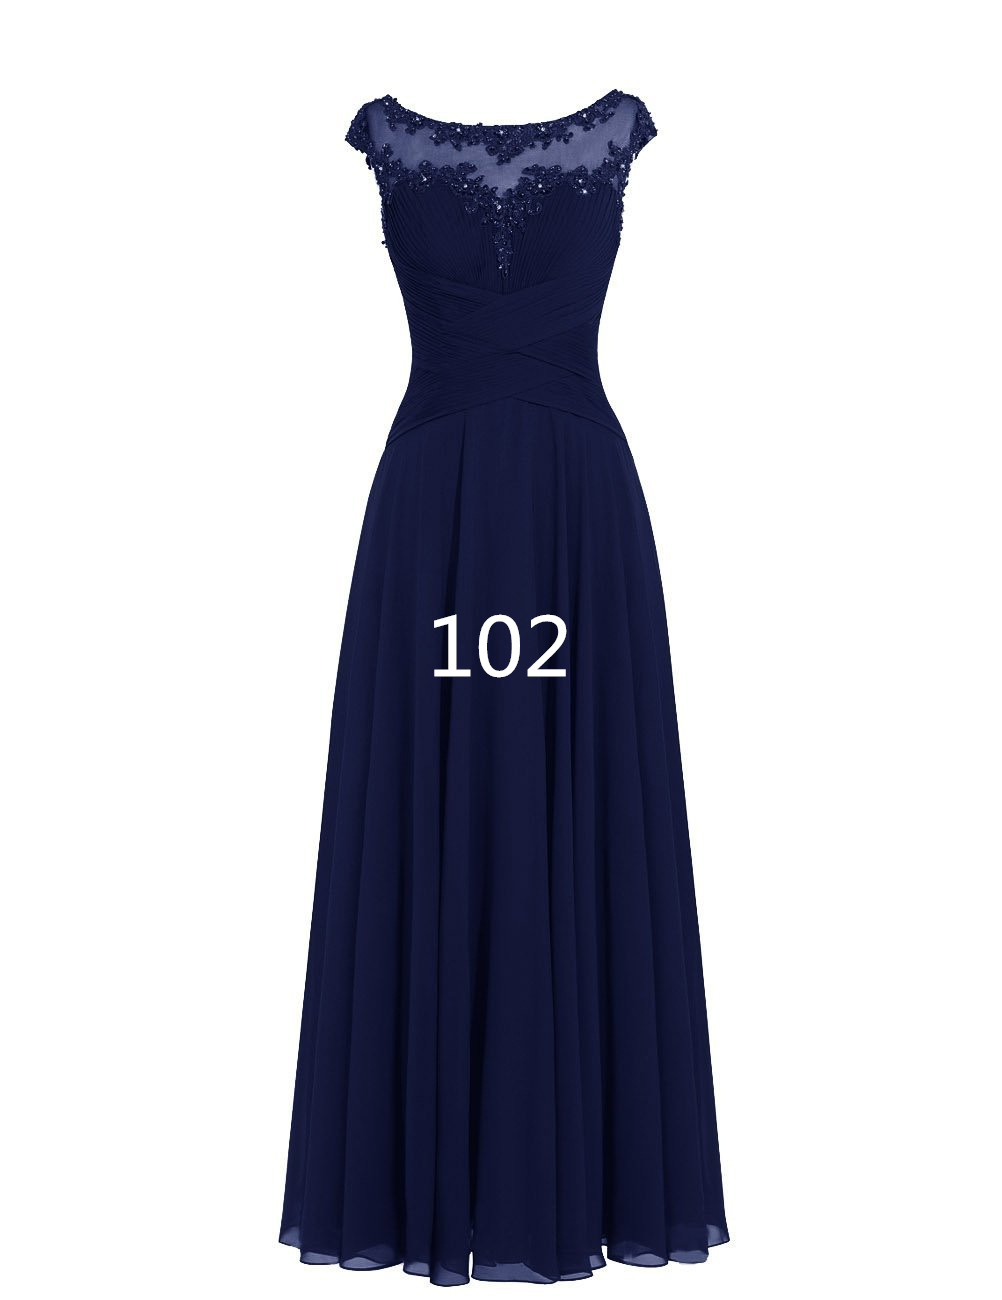 Women Sleveless Embroidered Chiffon Bridesmaid Dress Long Party Pageant Wedding Formal Dress - Navy Blue